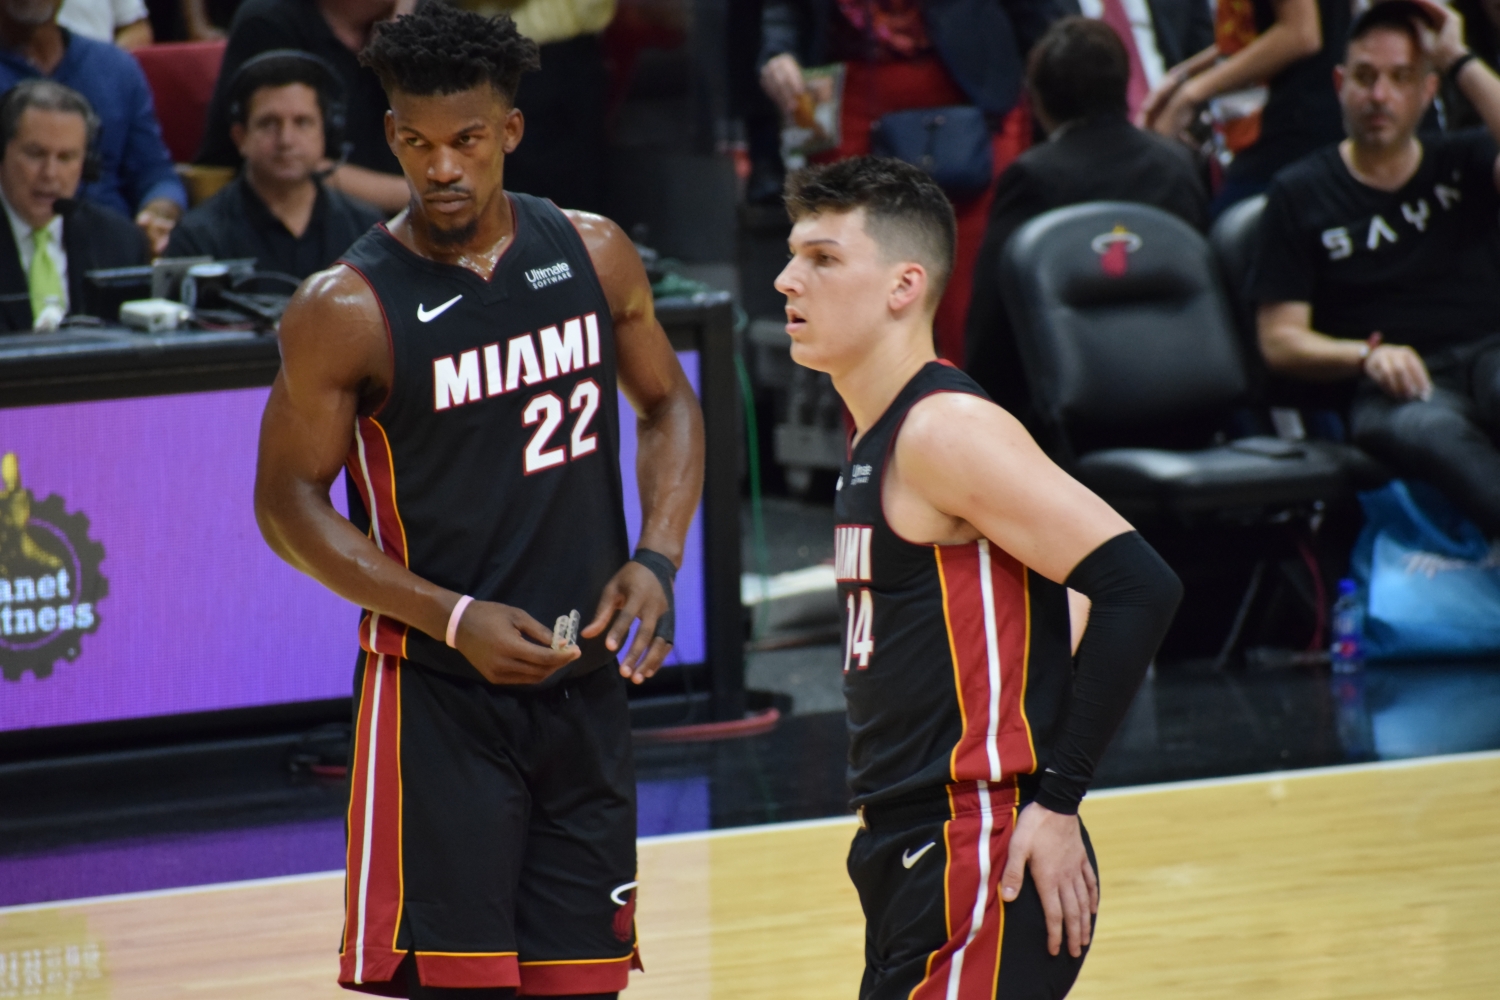 Heat's Jimmy Butler named to All-NBA Second Team